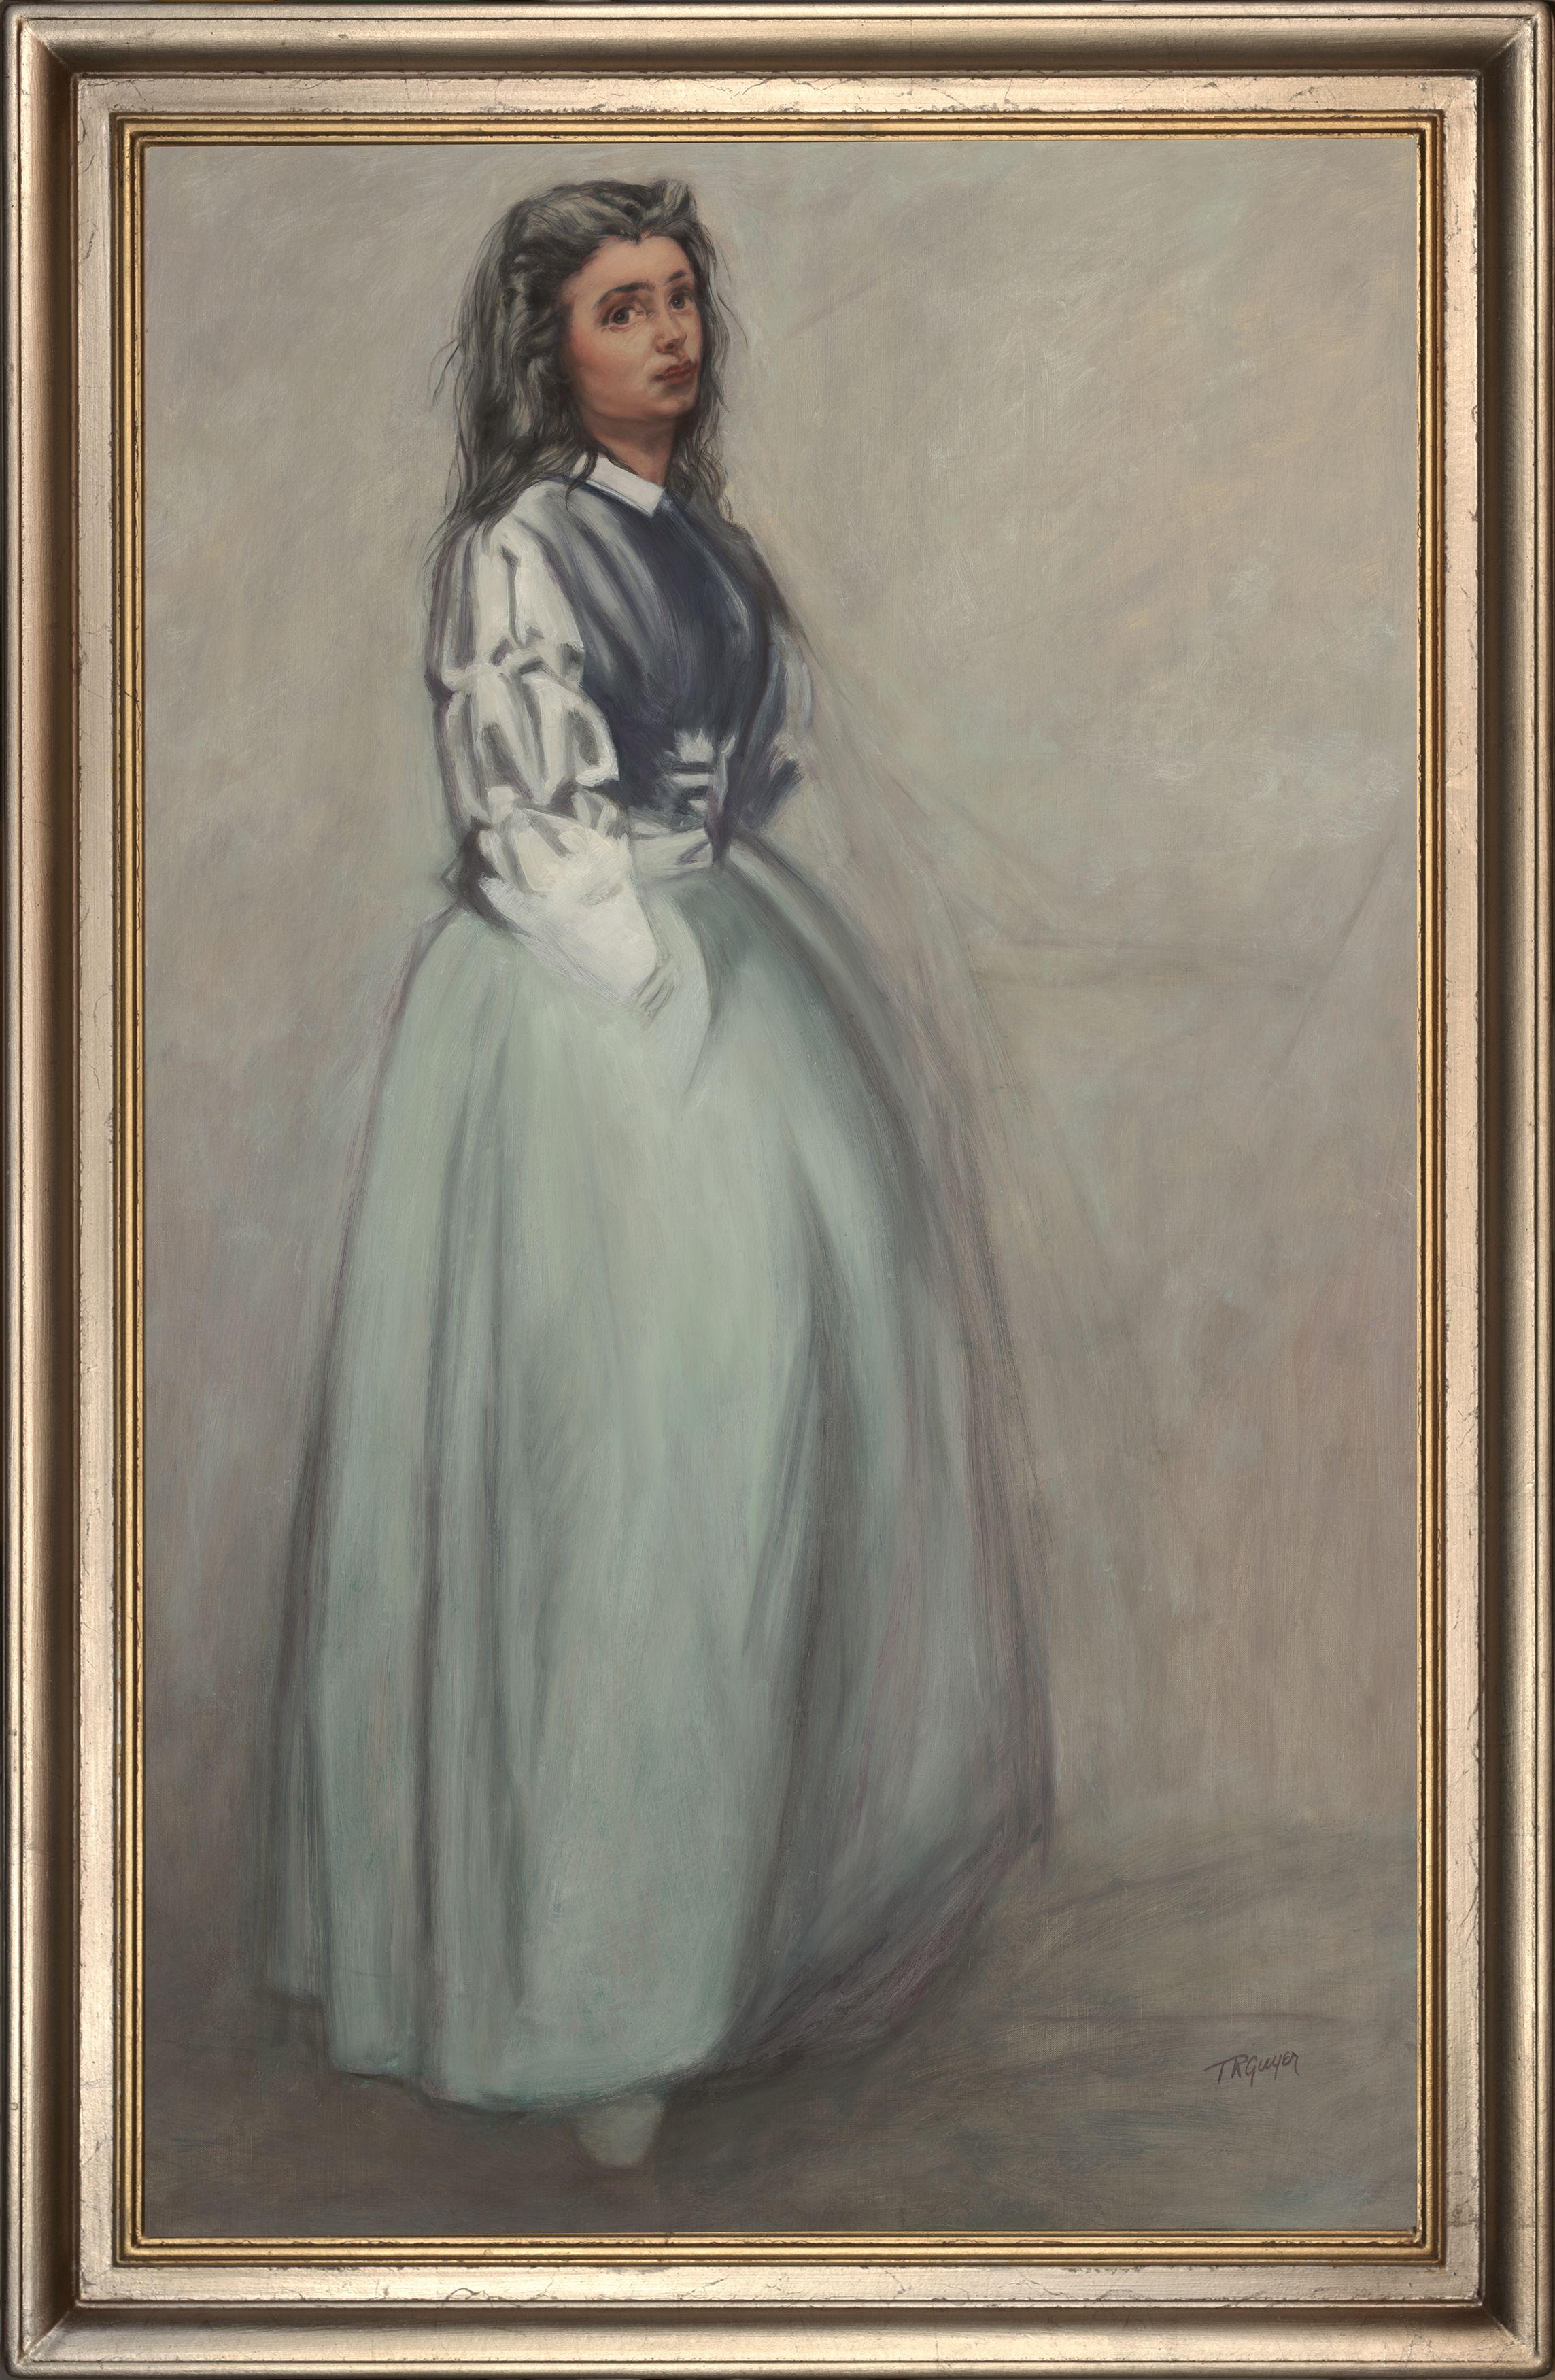 This oil painting evolved by exploring the possibility of translating the strong personality of Whistler's mid-1800's model Eloise, a modiste, from Whistler's etching of her 